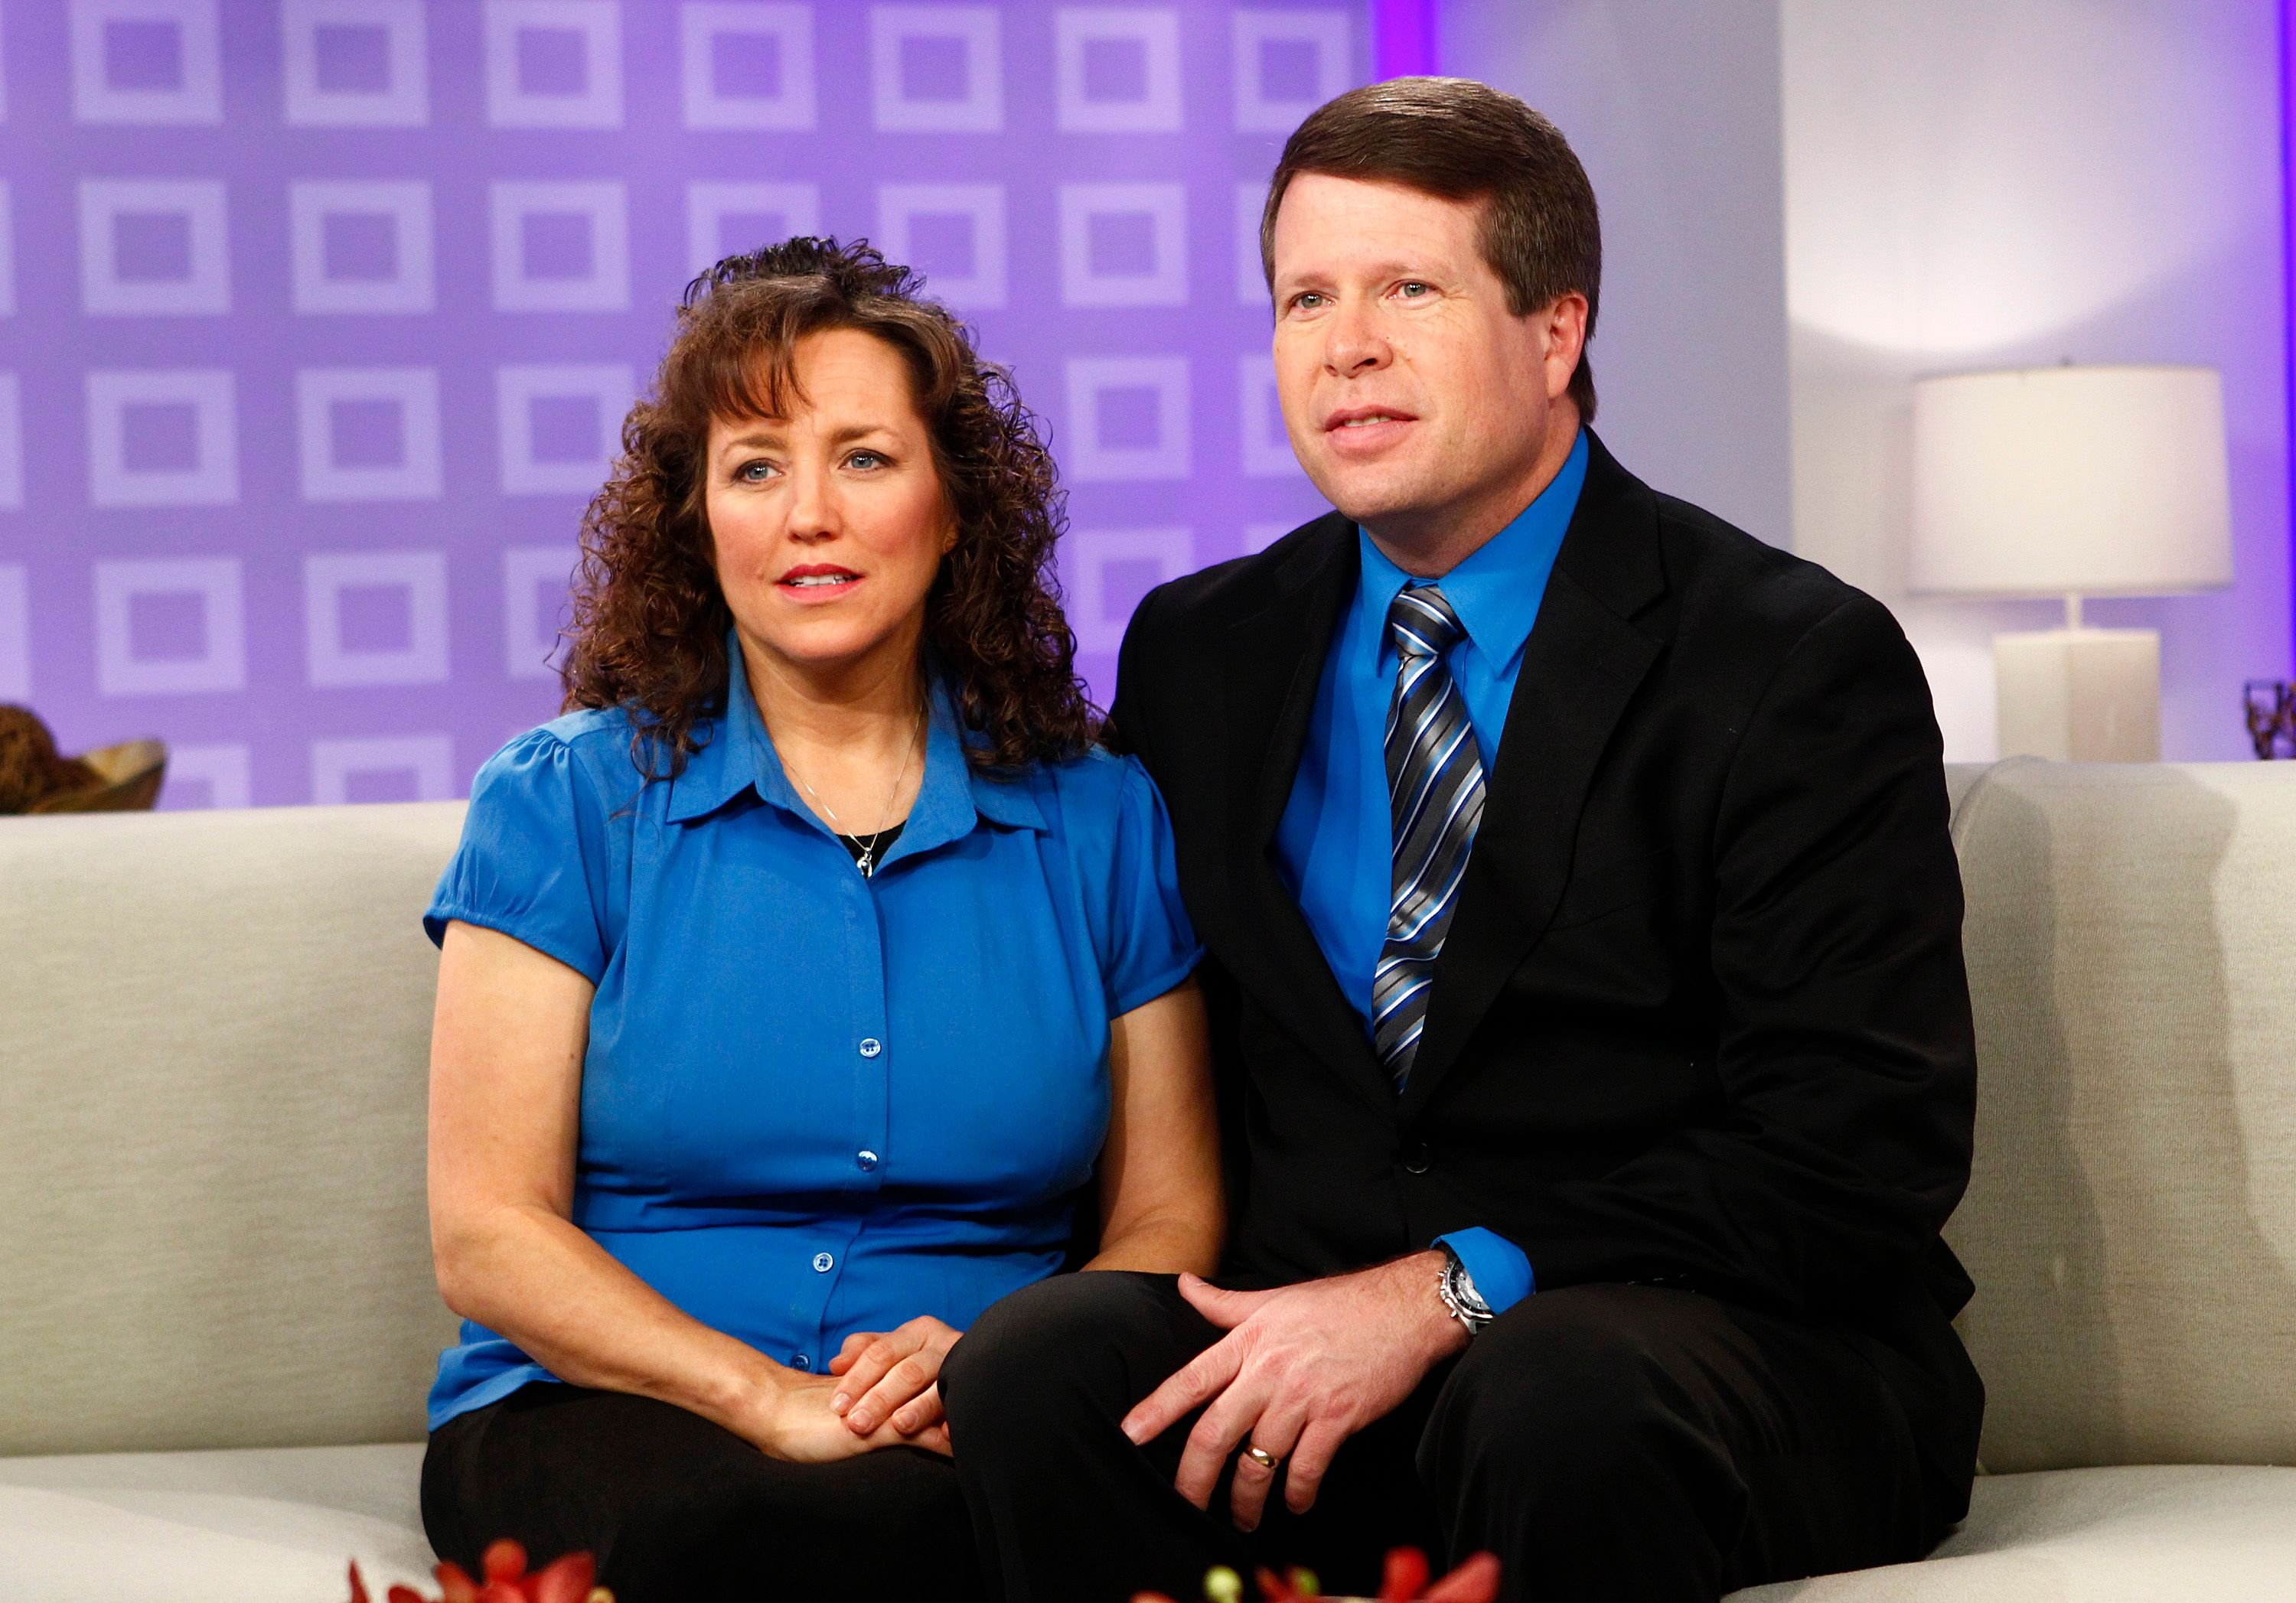 Michelle and Jim Bob Duggar during a guest appearance on the "Today" show | Photo: Peter Kramer/NBCU Photo Bank/NBCUniversal/Getty Images